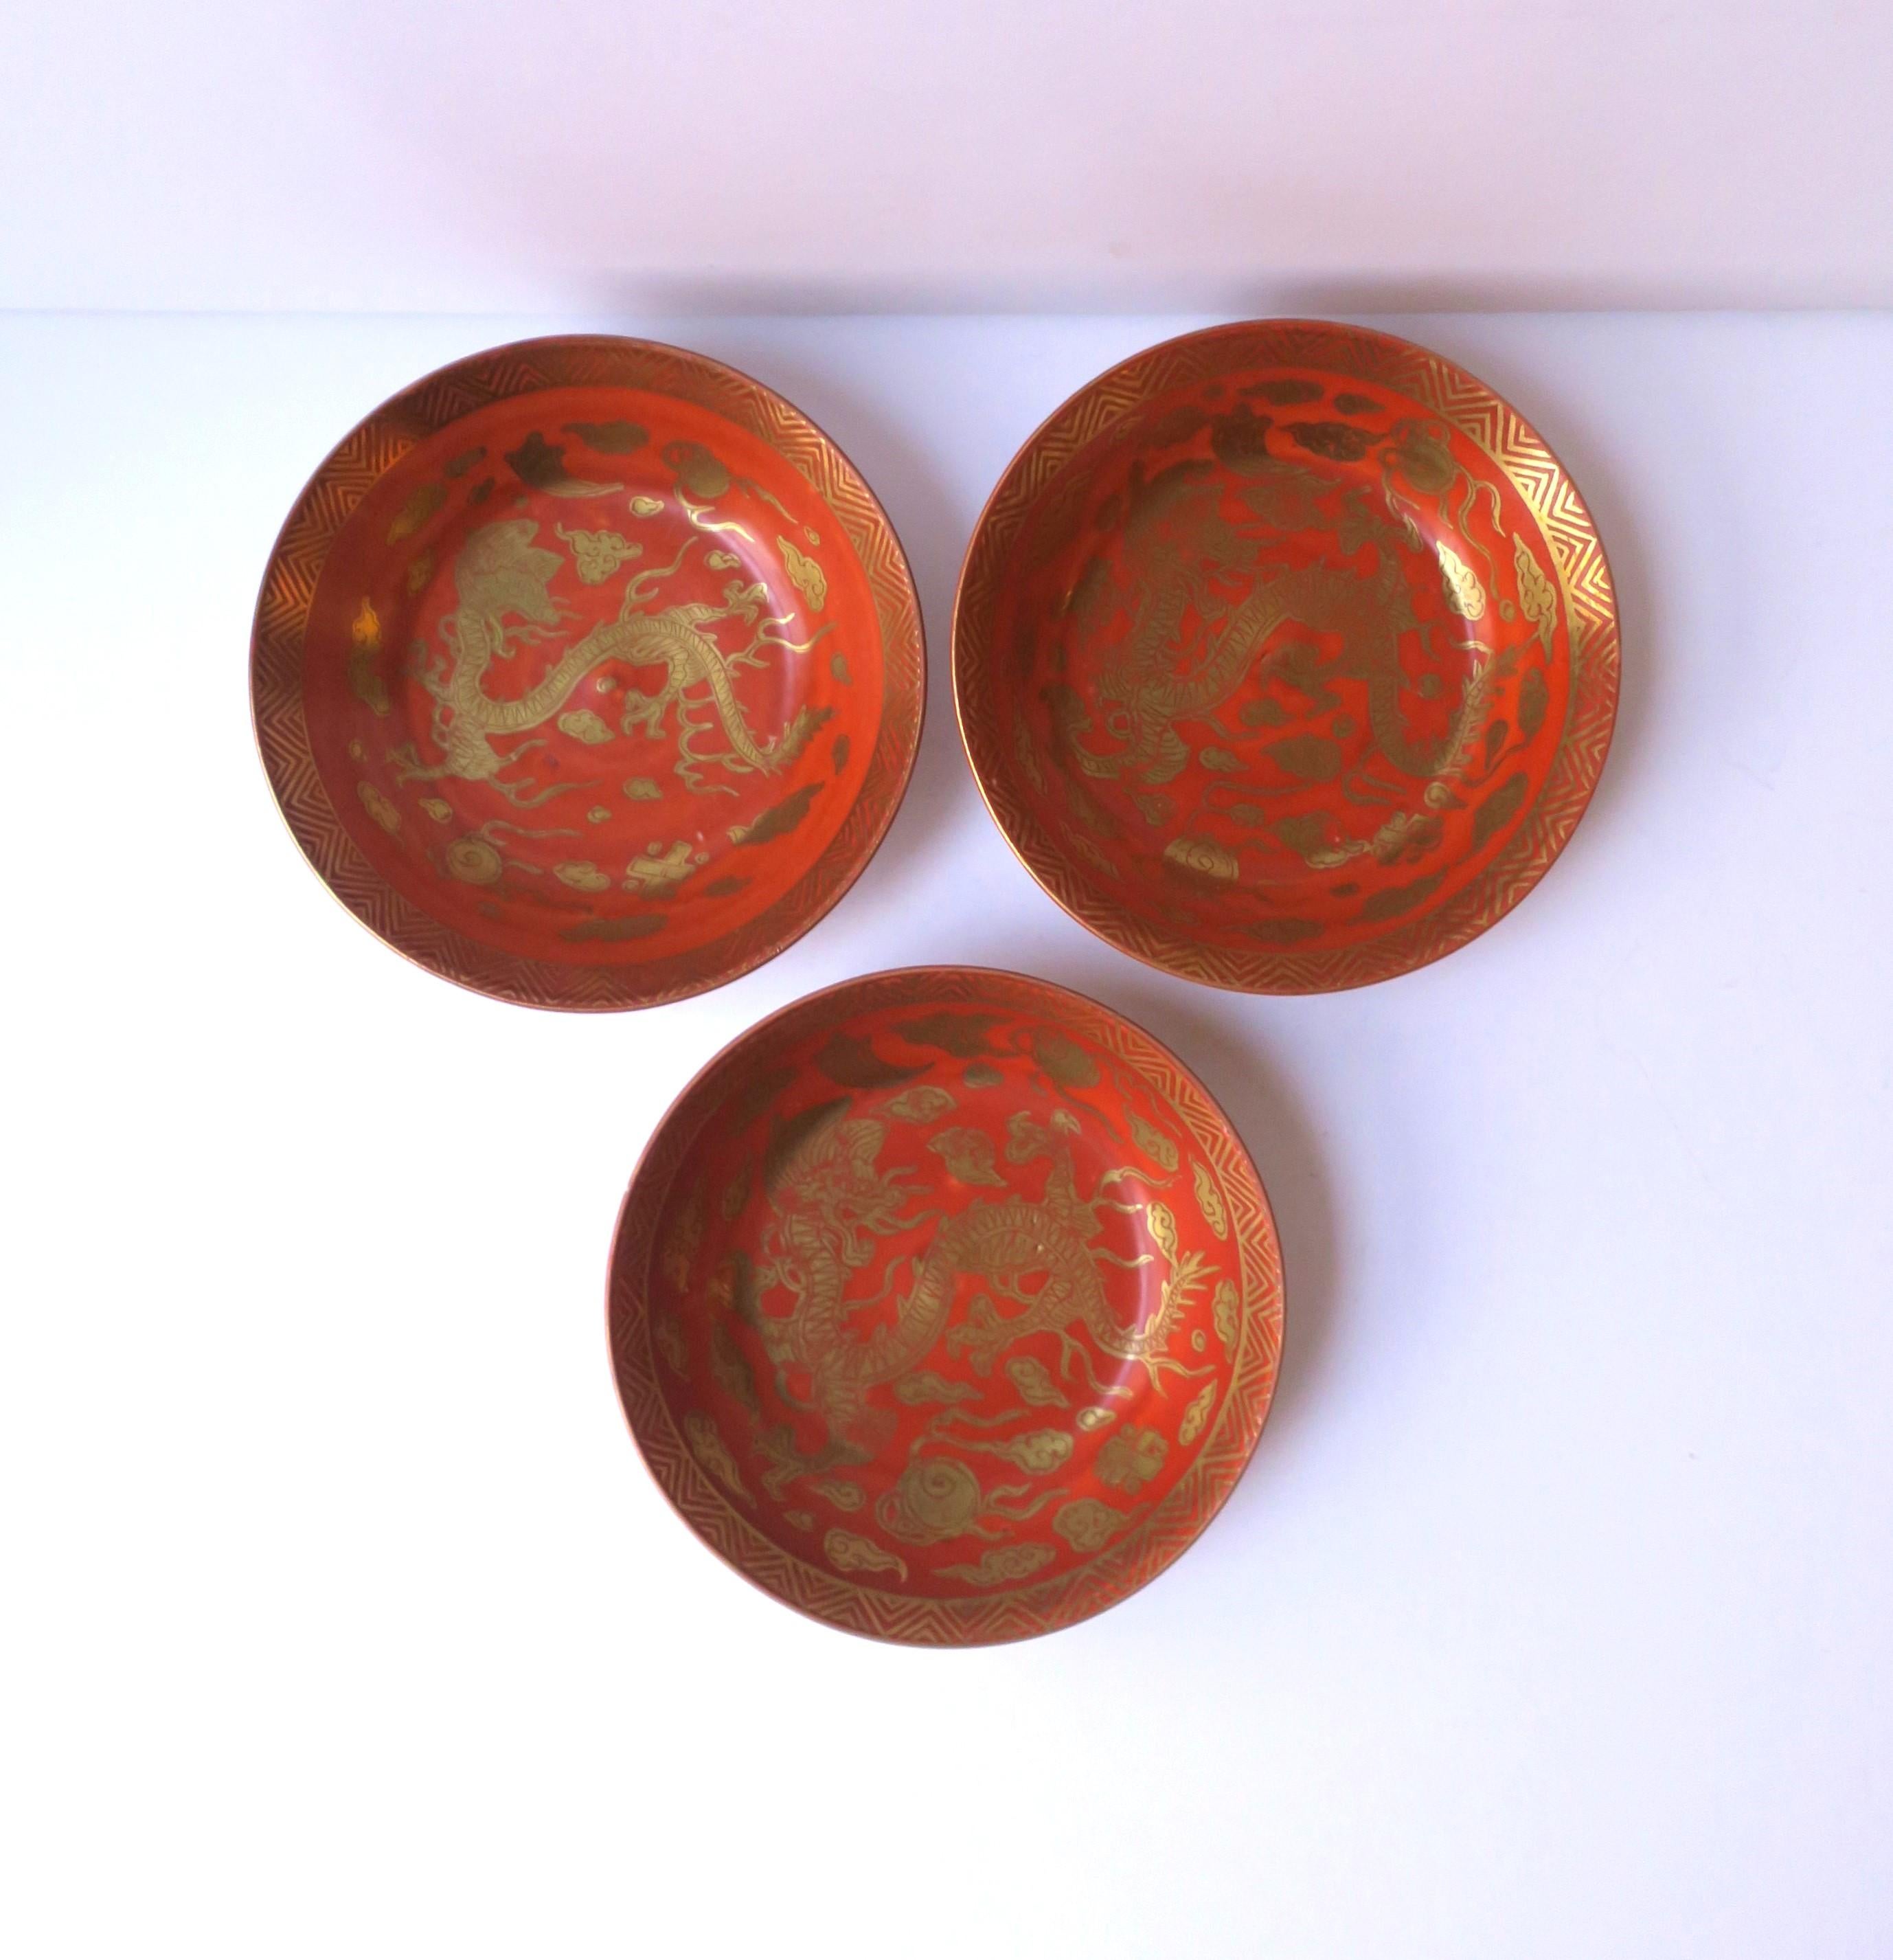 A set of three (3) Japanese porcelain gold and red finger or nut bowls with dragon design, circa mid-20th century, Japan. Beautiful dragon detail with fire flaming tongue and chevron-like design around edge. A great set for entertaining; nuts,